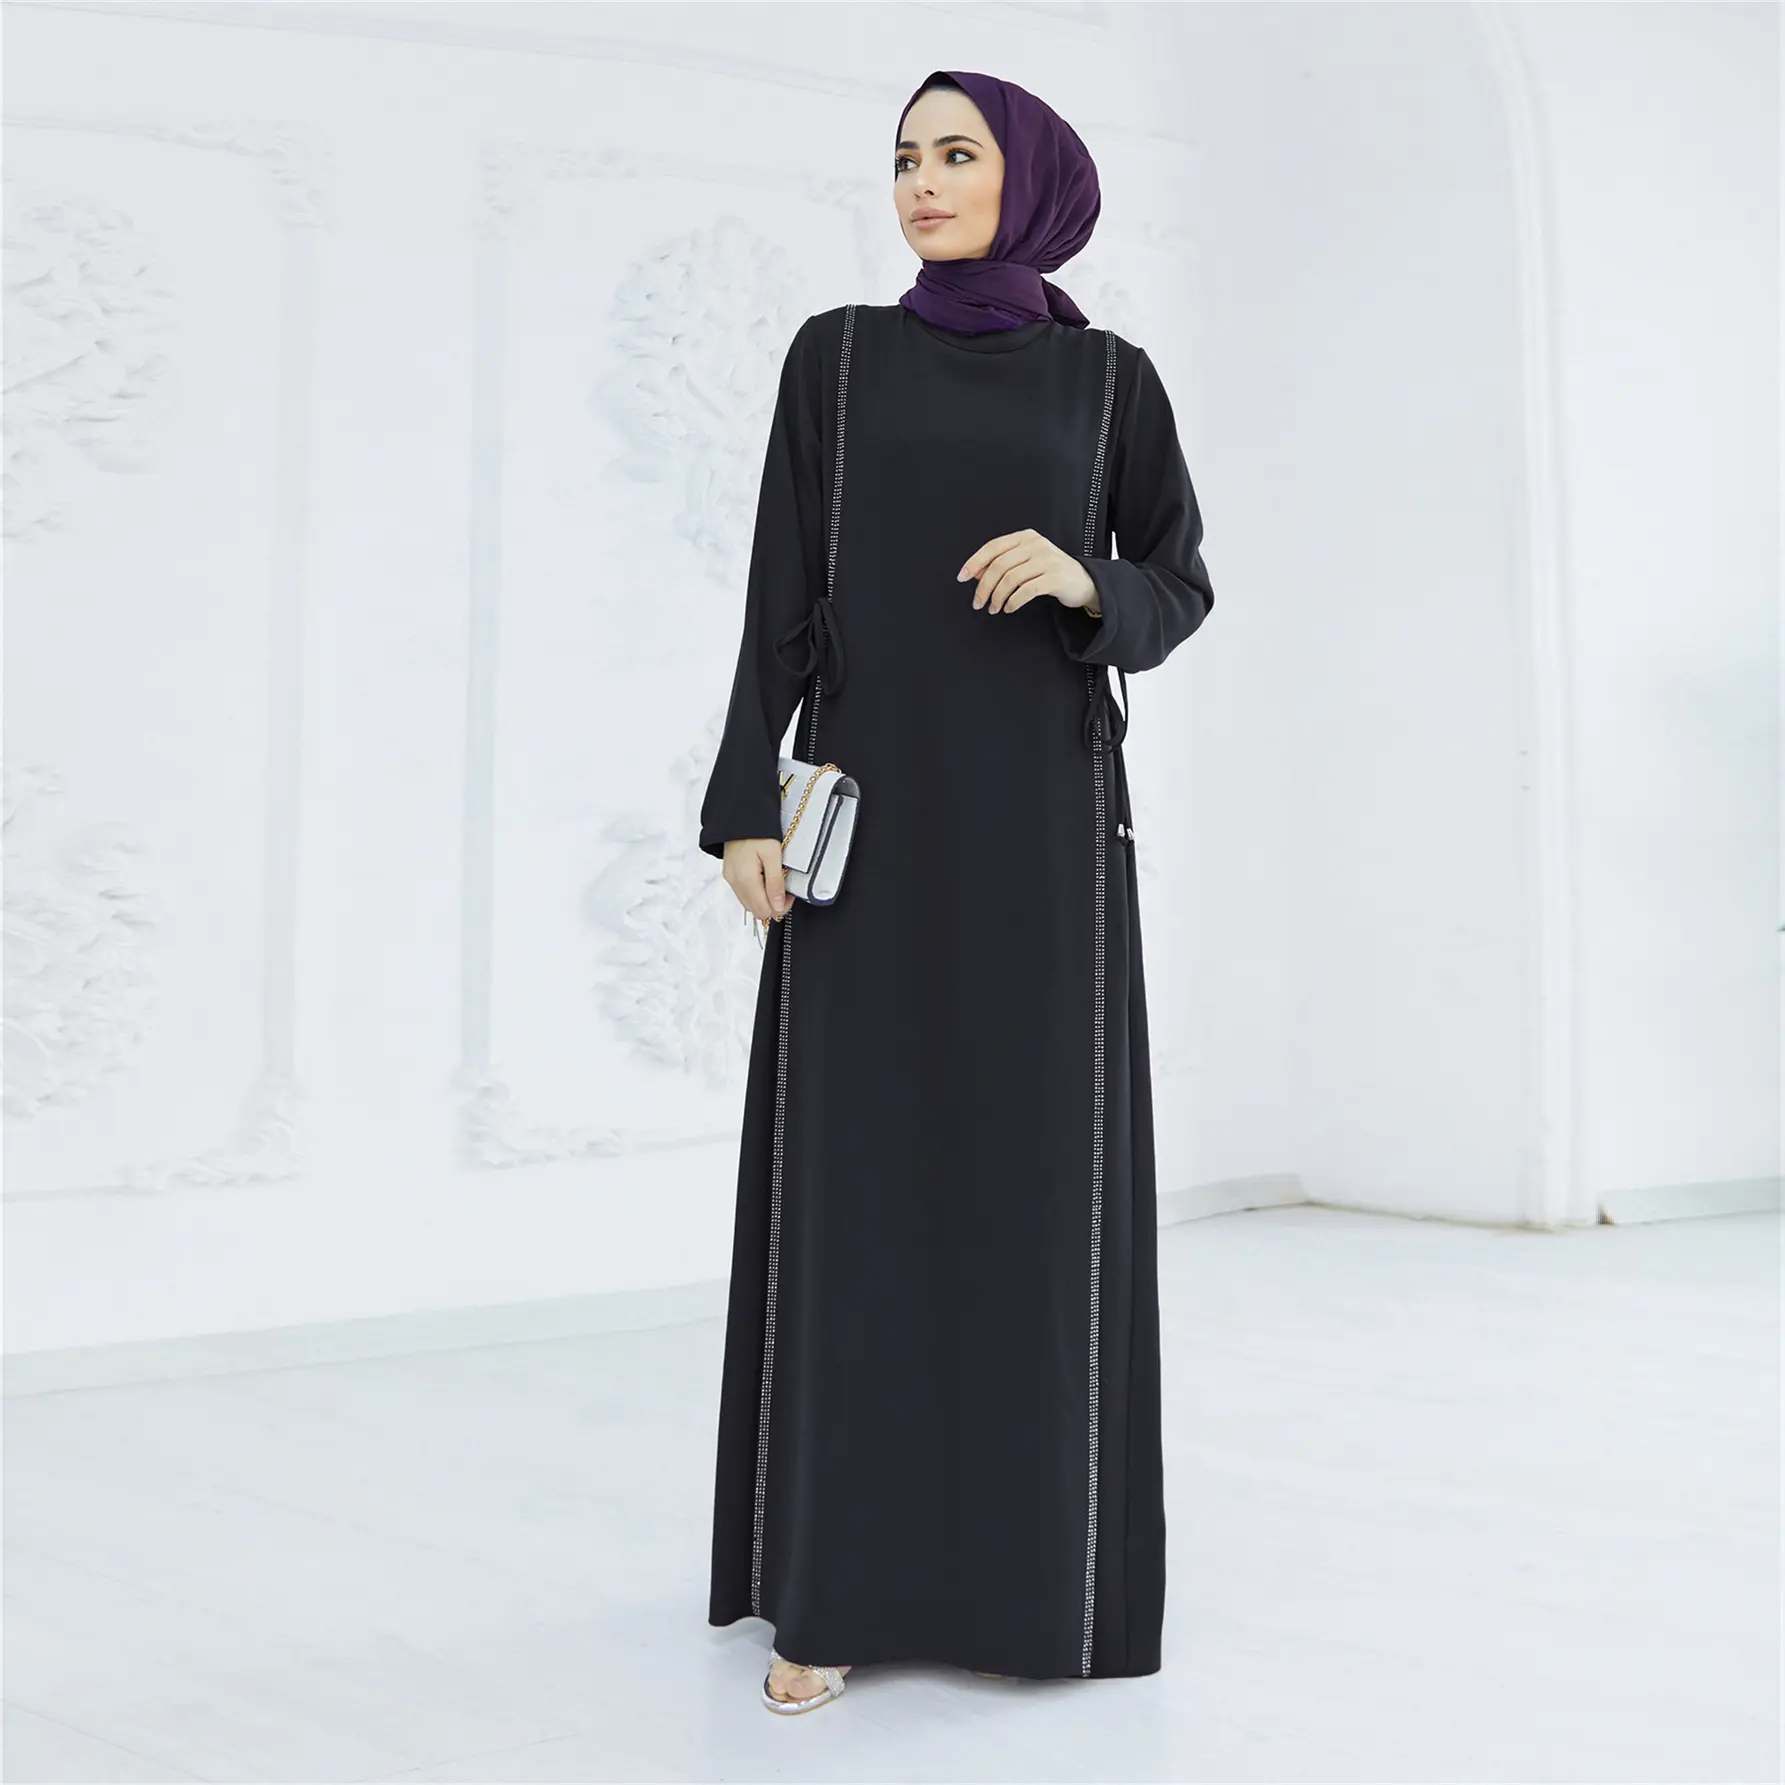 380 Wholesale abaya Malaysia Turkish designs clothes for women modest dress of traditional muslim clothing & accessories